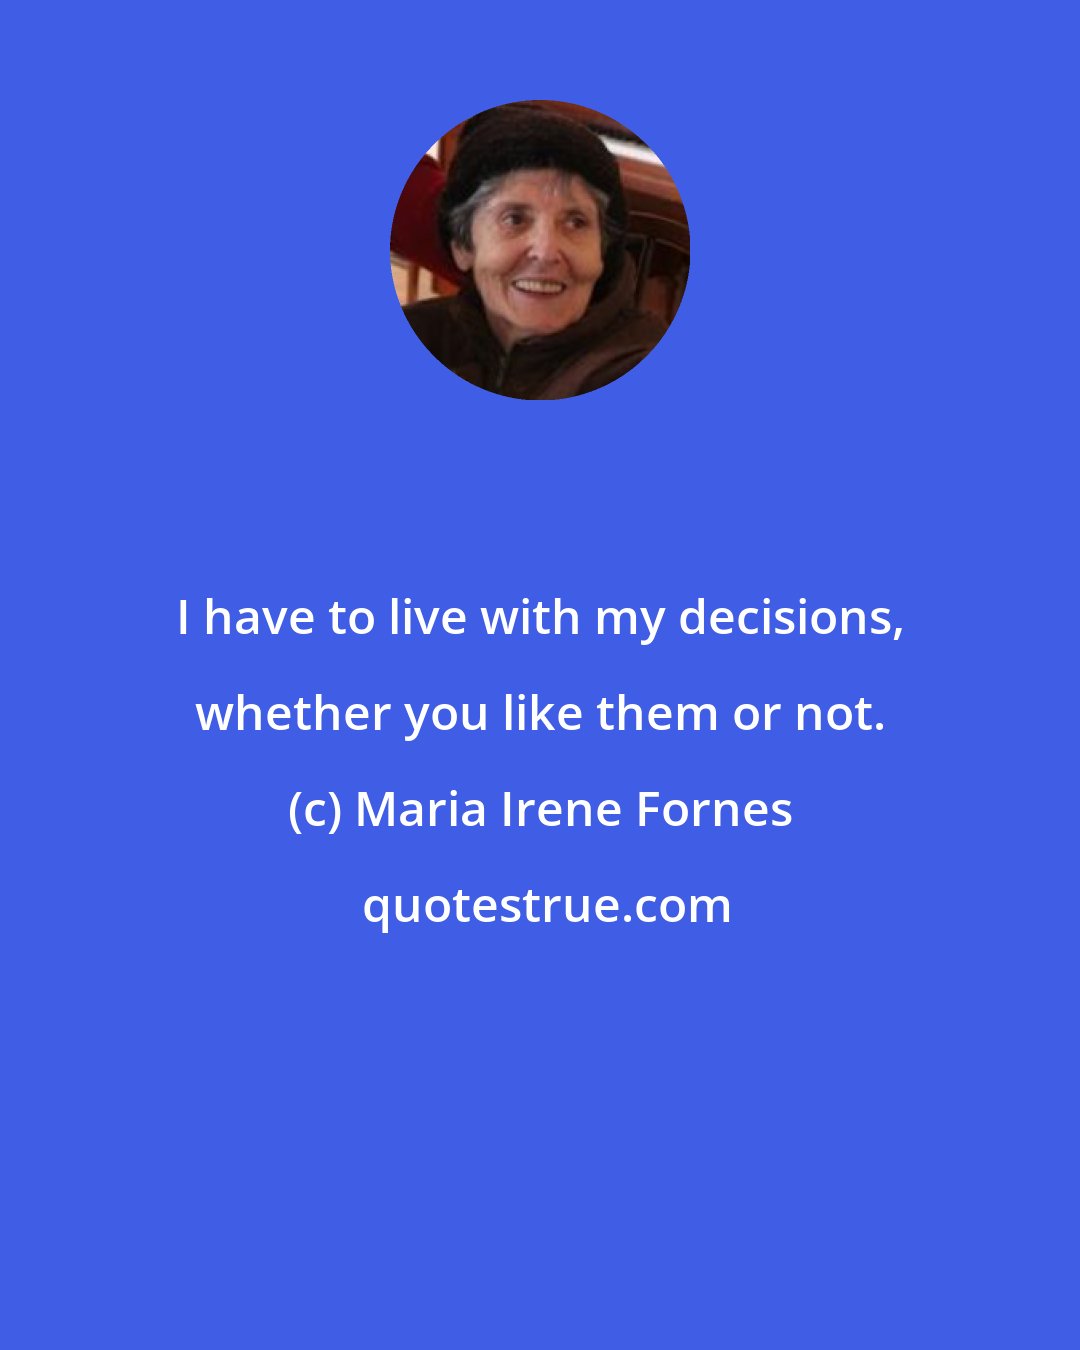 Maria Irene Fornes: I have to live with my decisions, whether you like them or not.